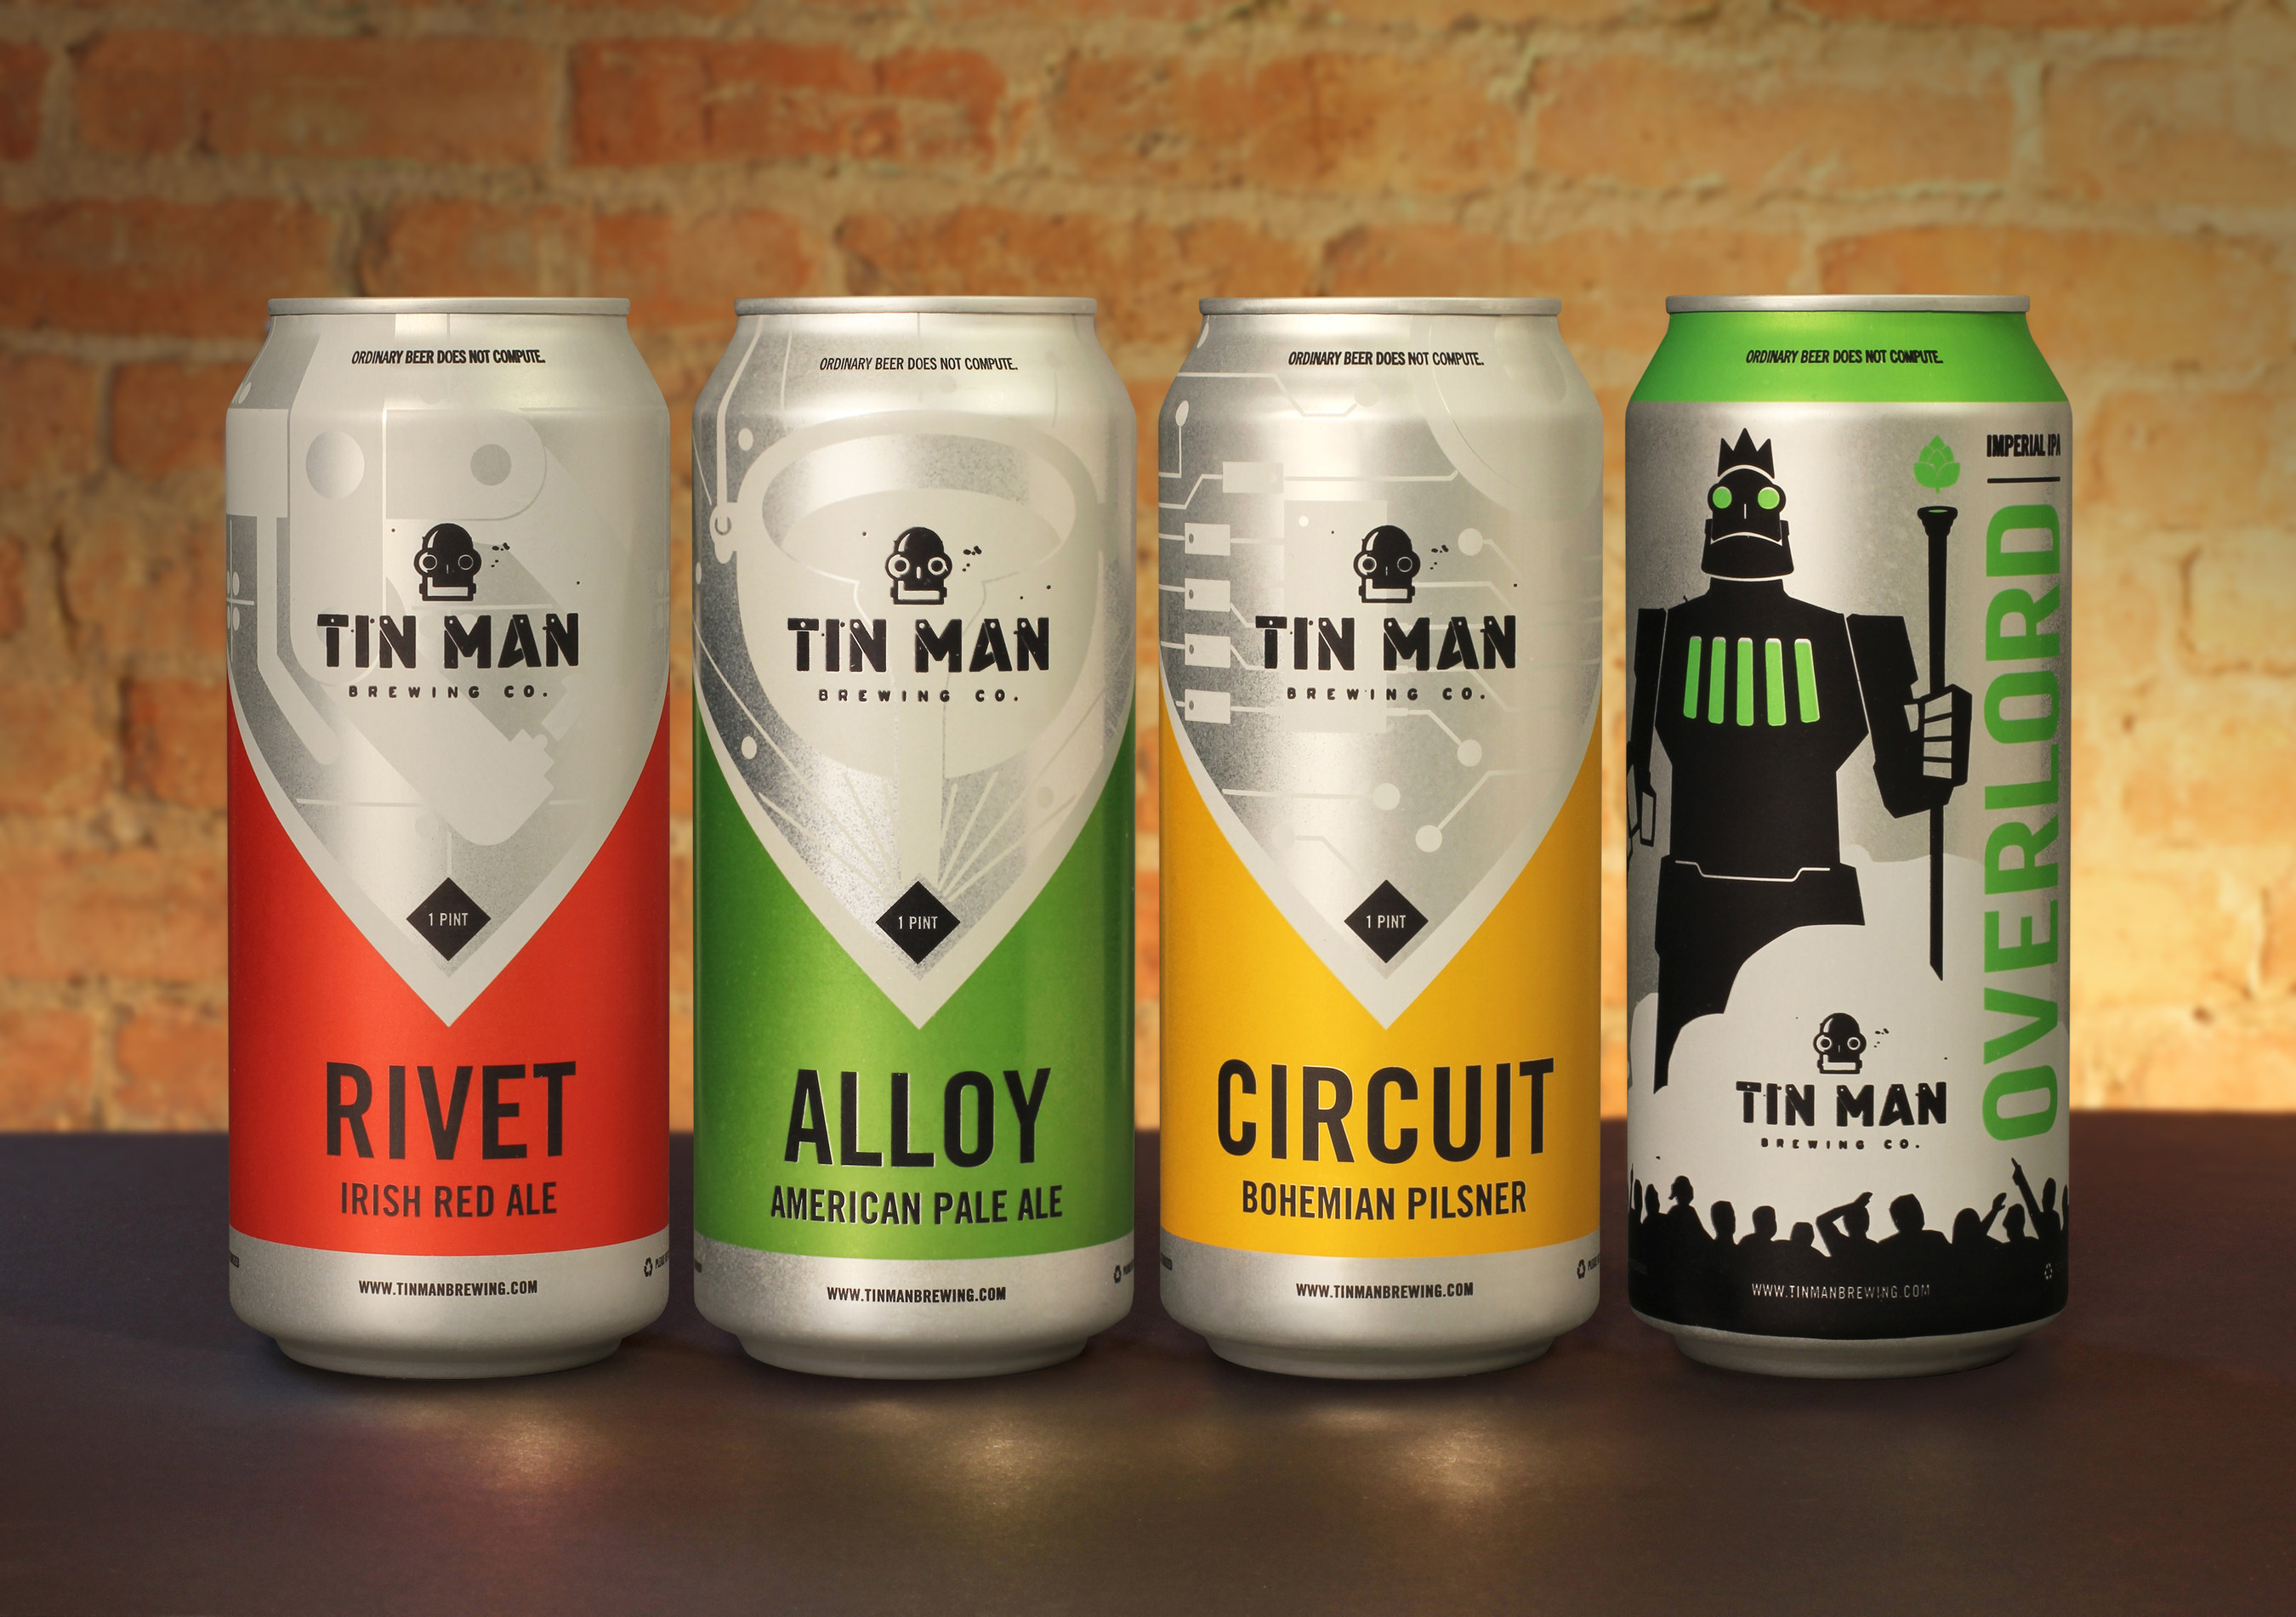 Tin Man Brewing Co. is offering four of its core beers in Rexam 16 oz. cans.